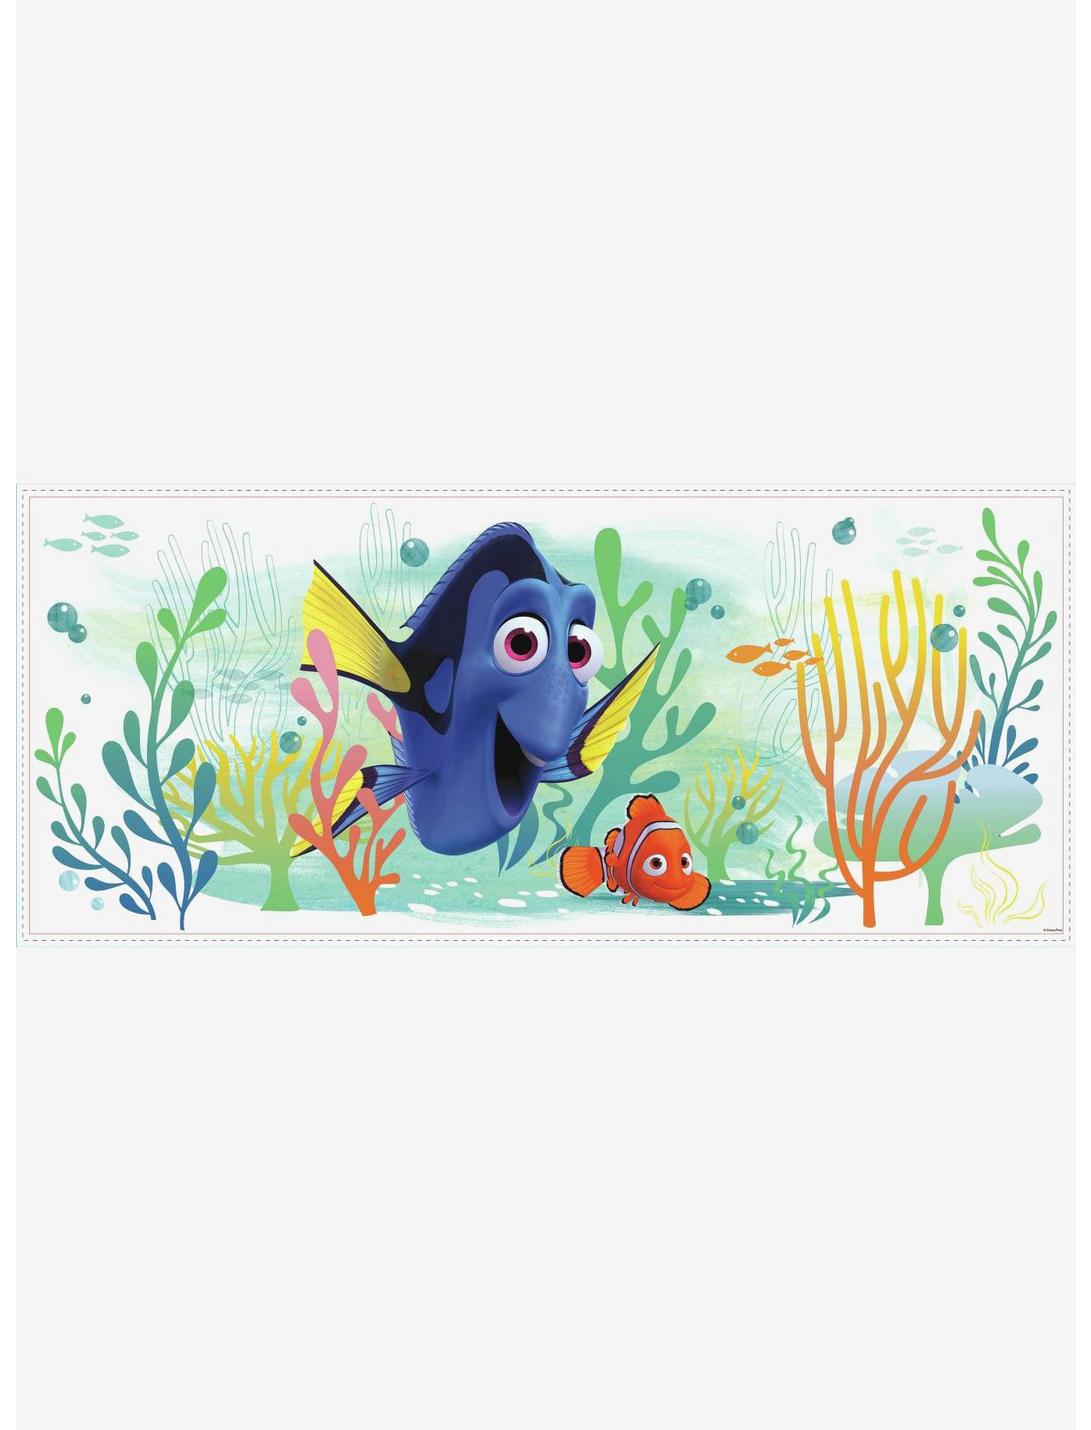 Disney Pixar Finding Dory And Nemo Peel And Stick Giant Wall Graphic, , hi-res